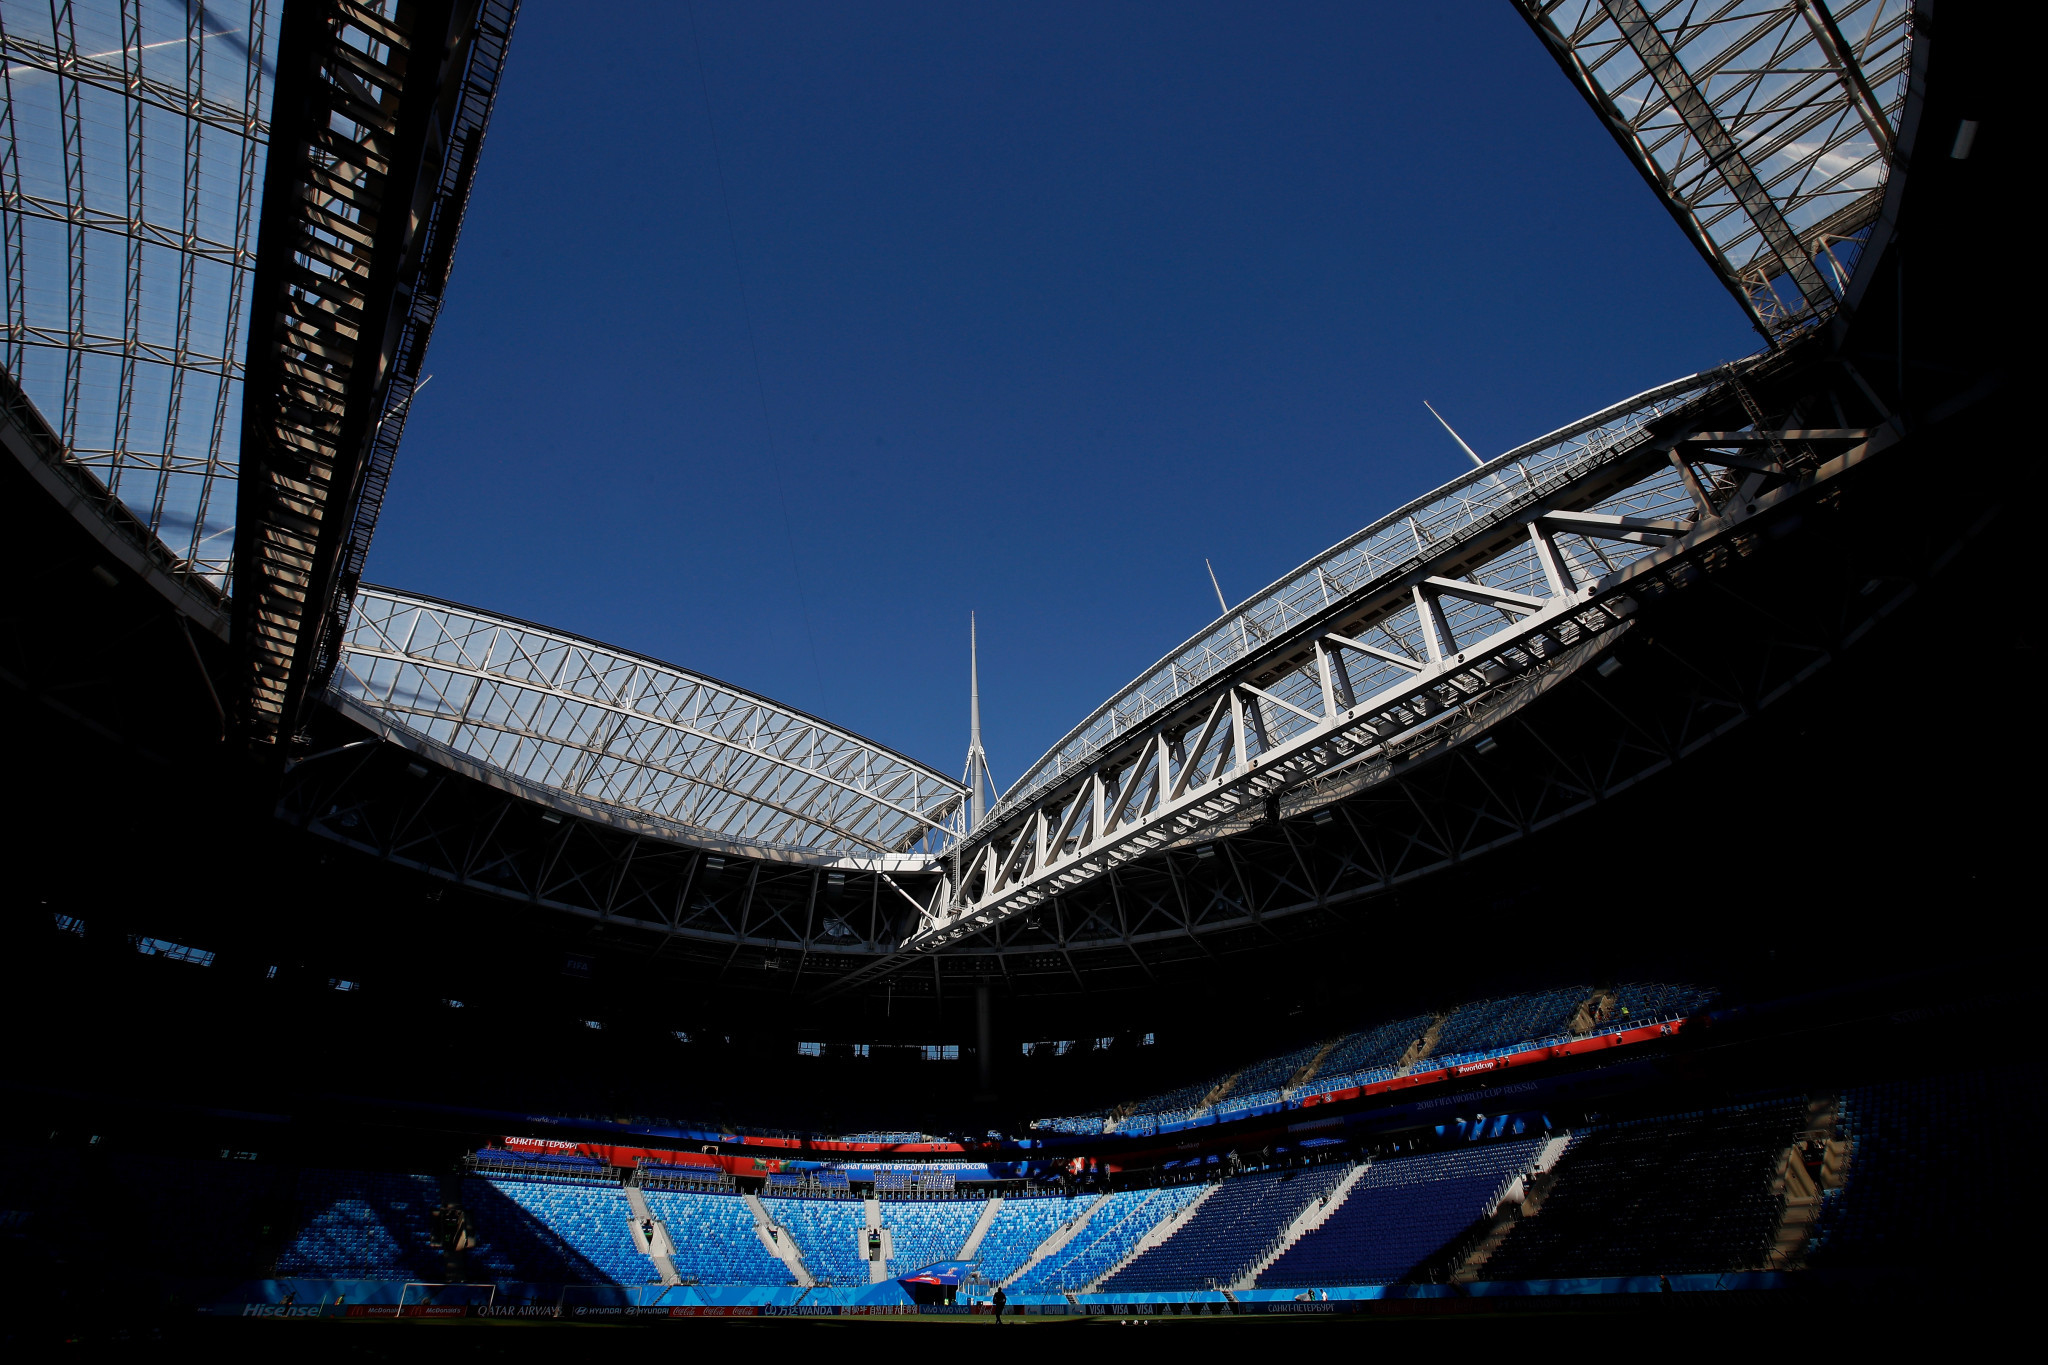 UEFA faces pressure to move Champions League Final from Saint Petersburg, calls for clarification over FIFA World Cup qualifiers